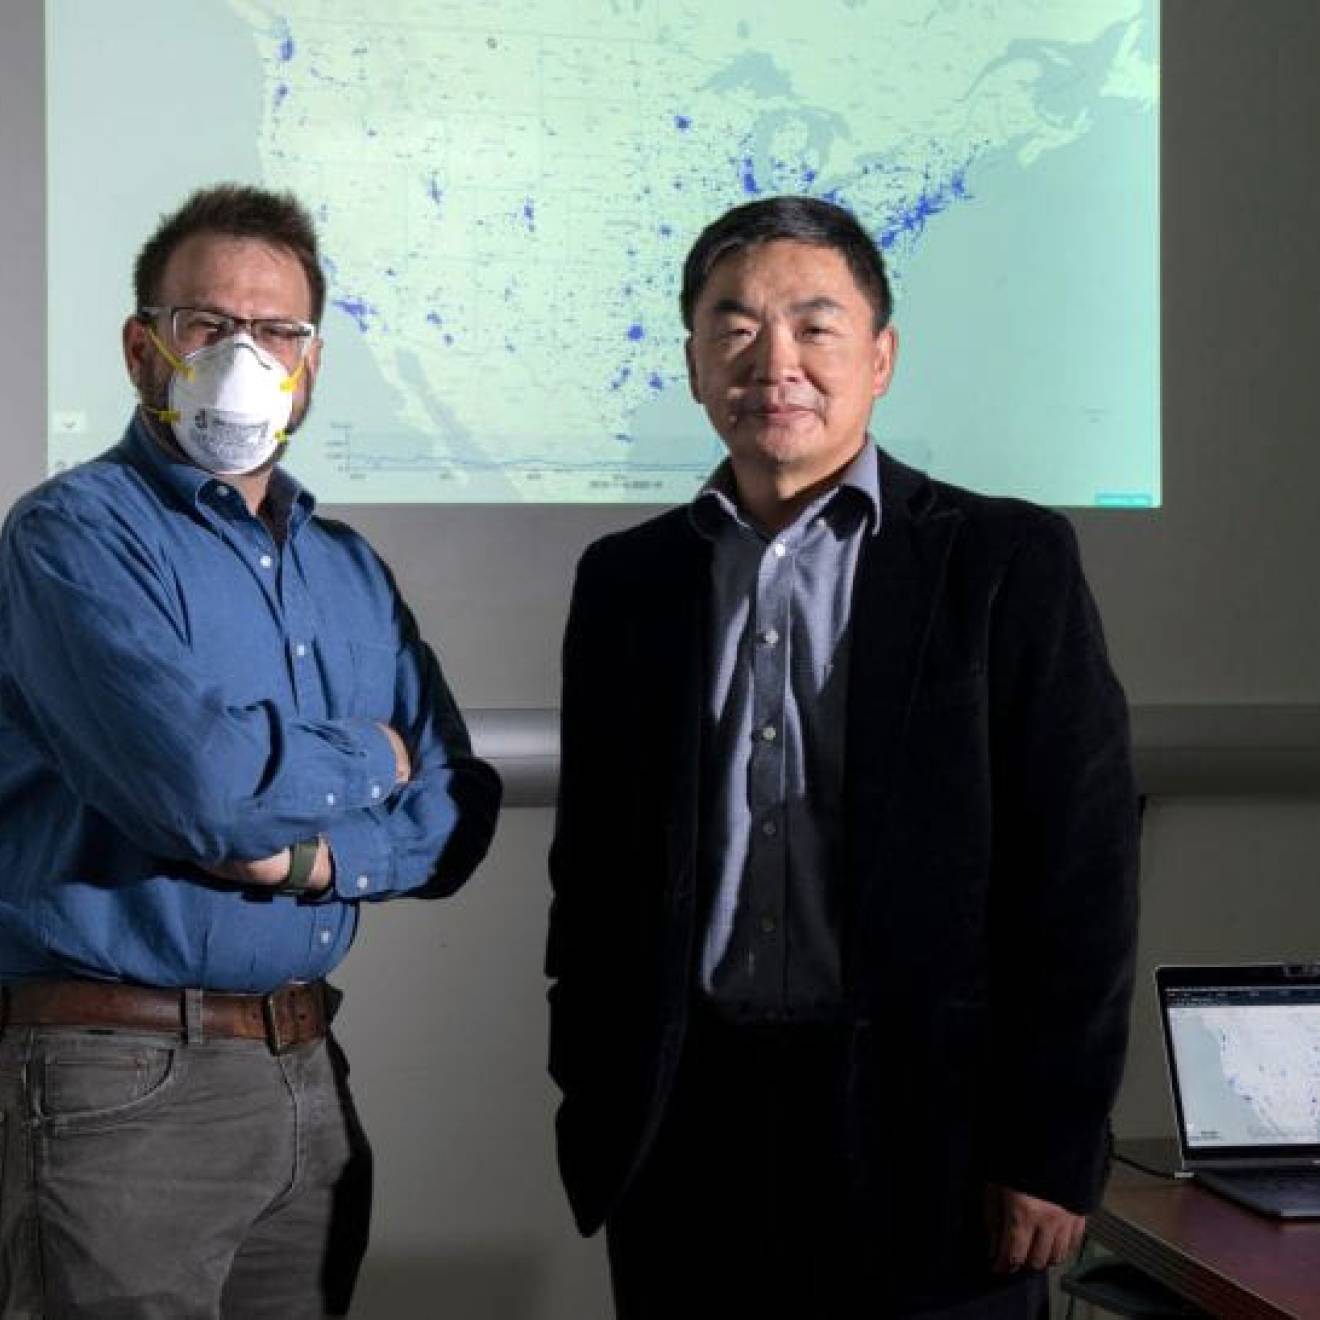 Two men standing together with a projector screen behind them, one wearing a face mask